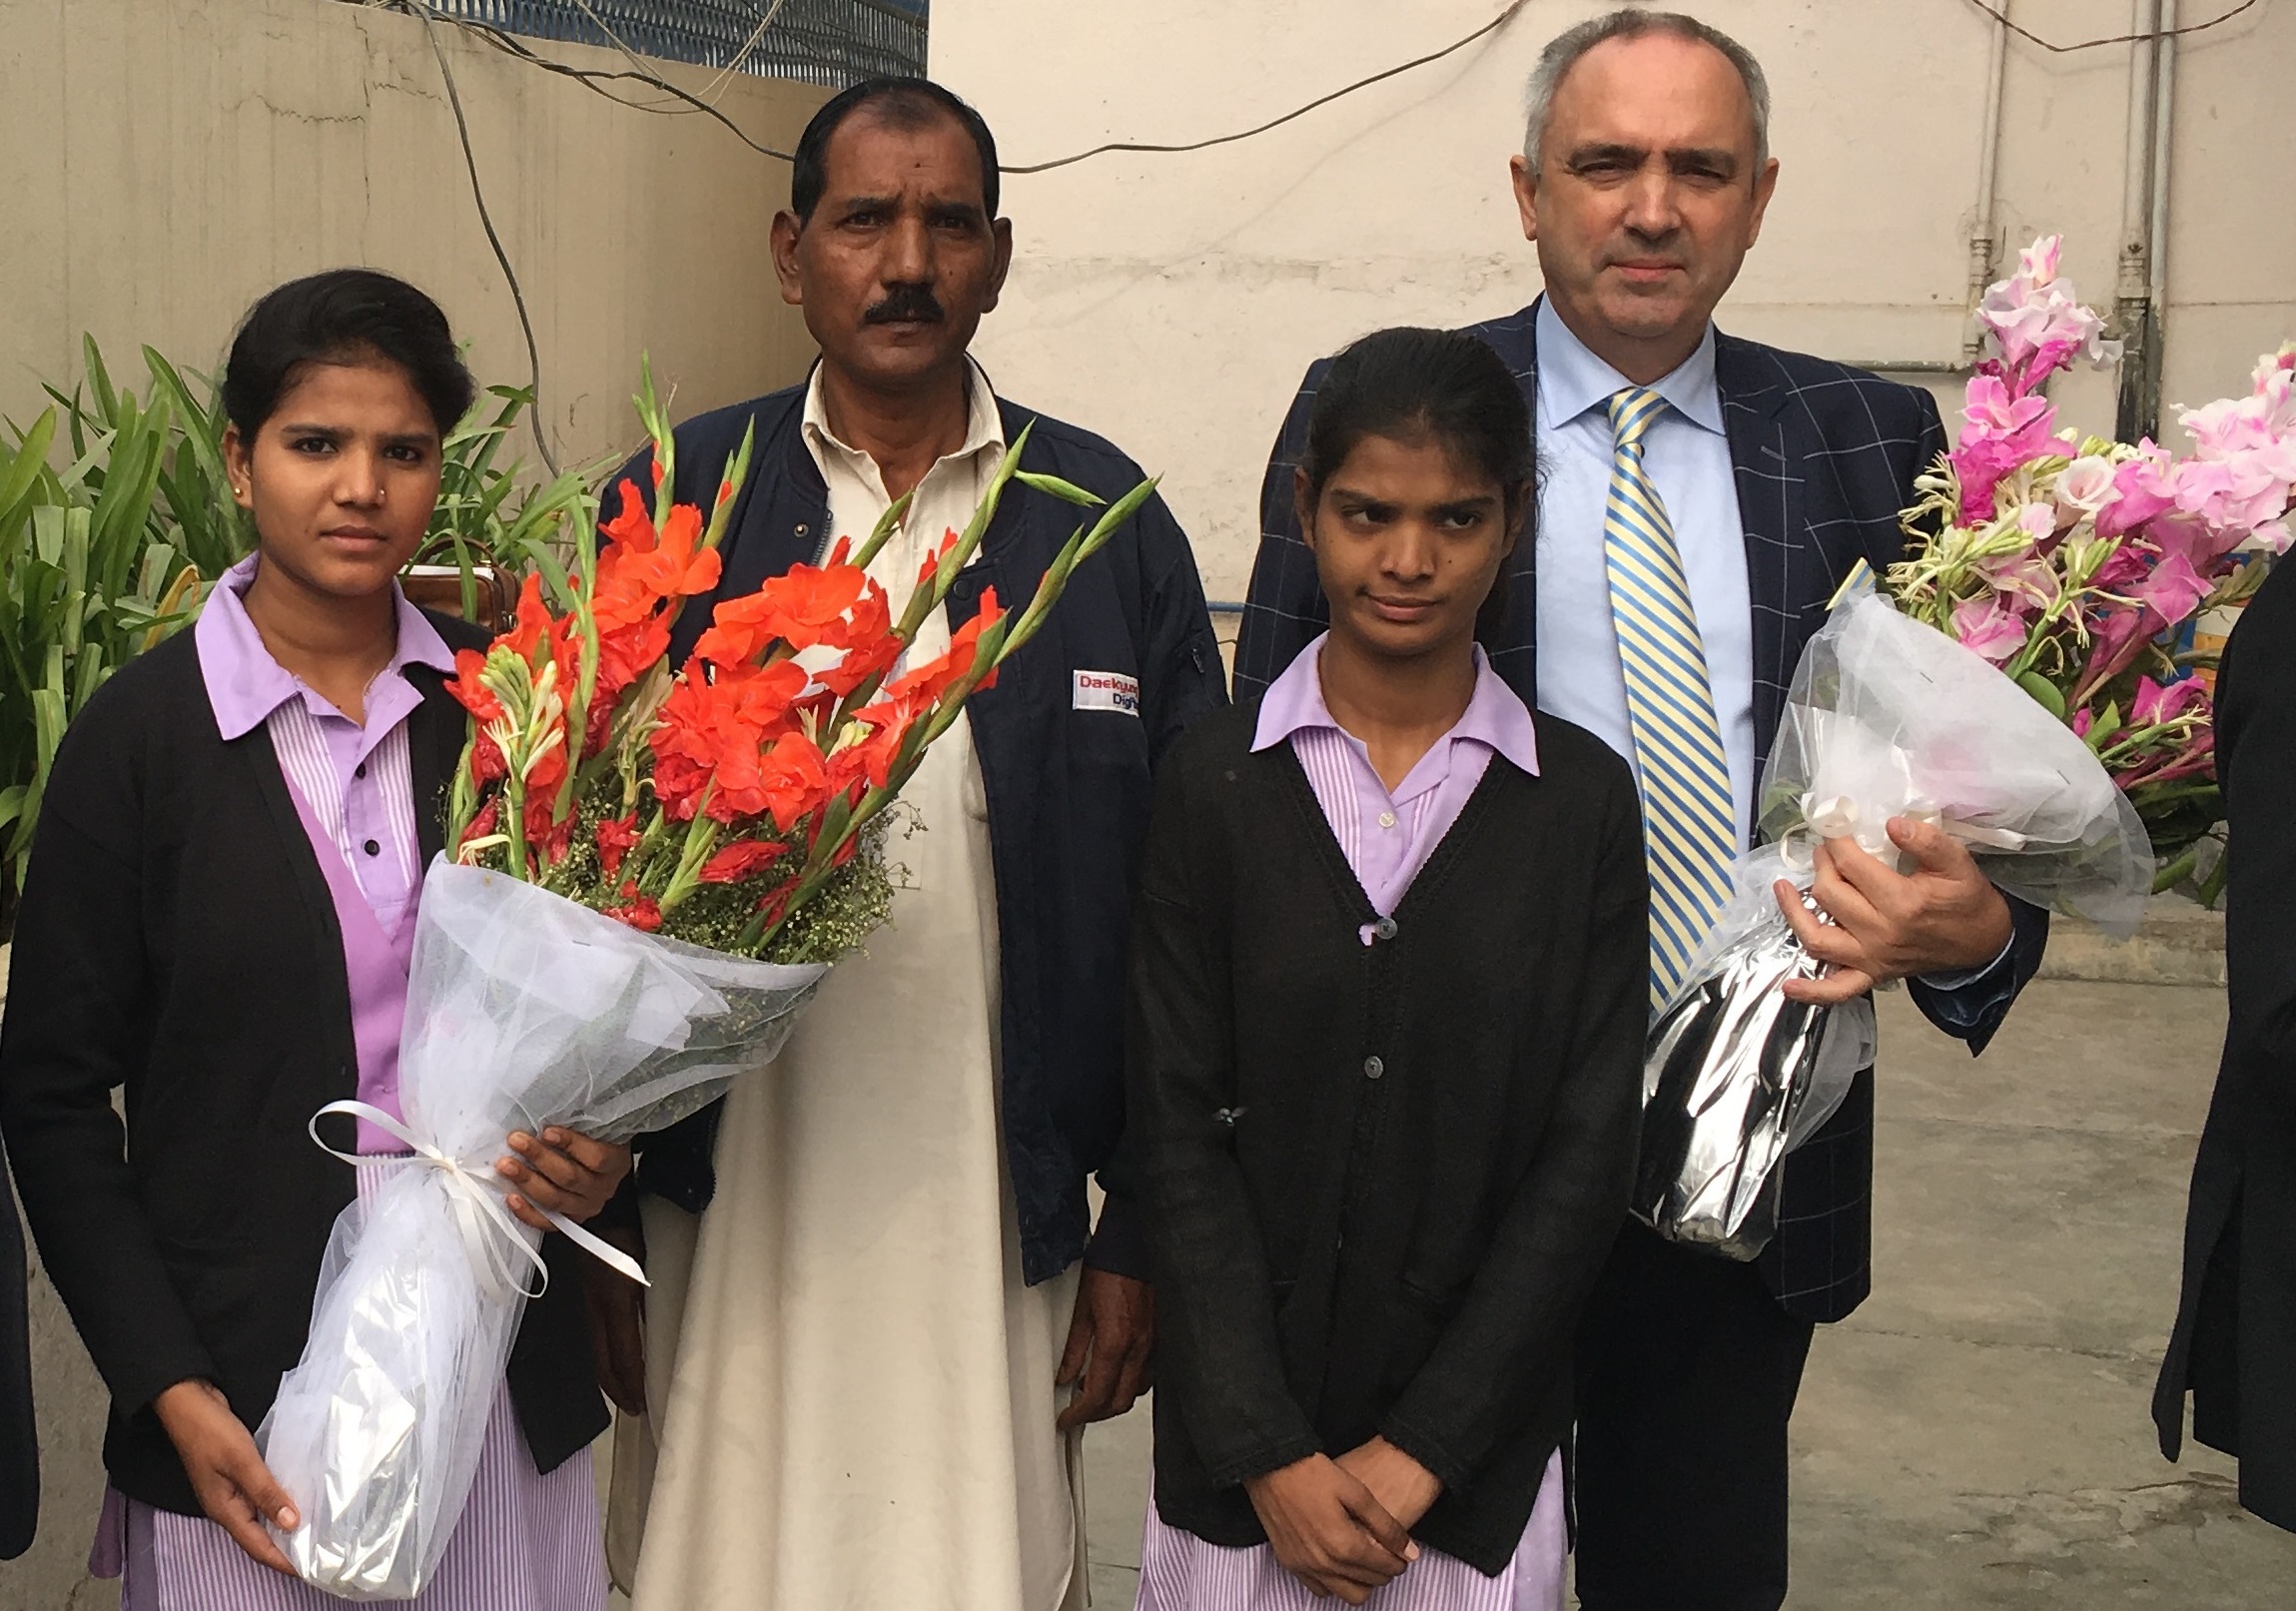 Dutch MEP Peter van Dalen with Asia Bibi's husband, Ashiq, and two of their daughters (BosNewsLife)